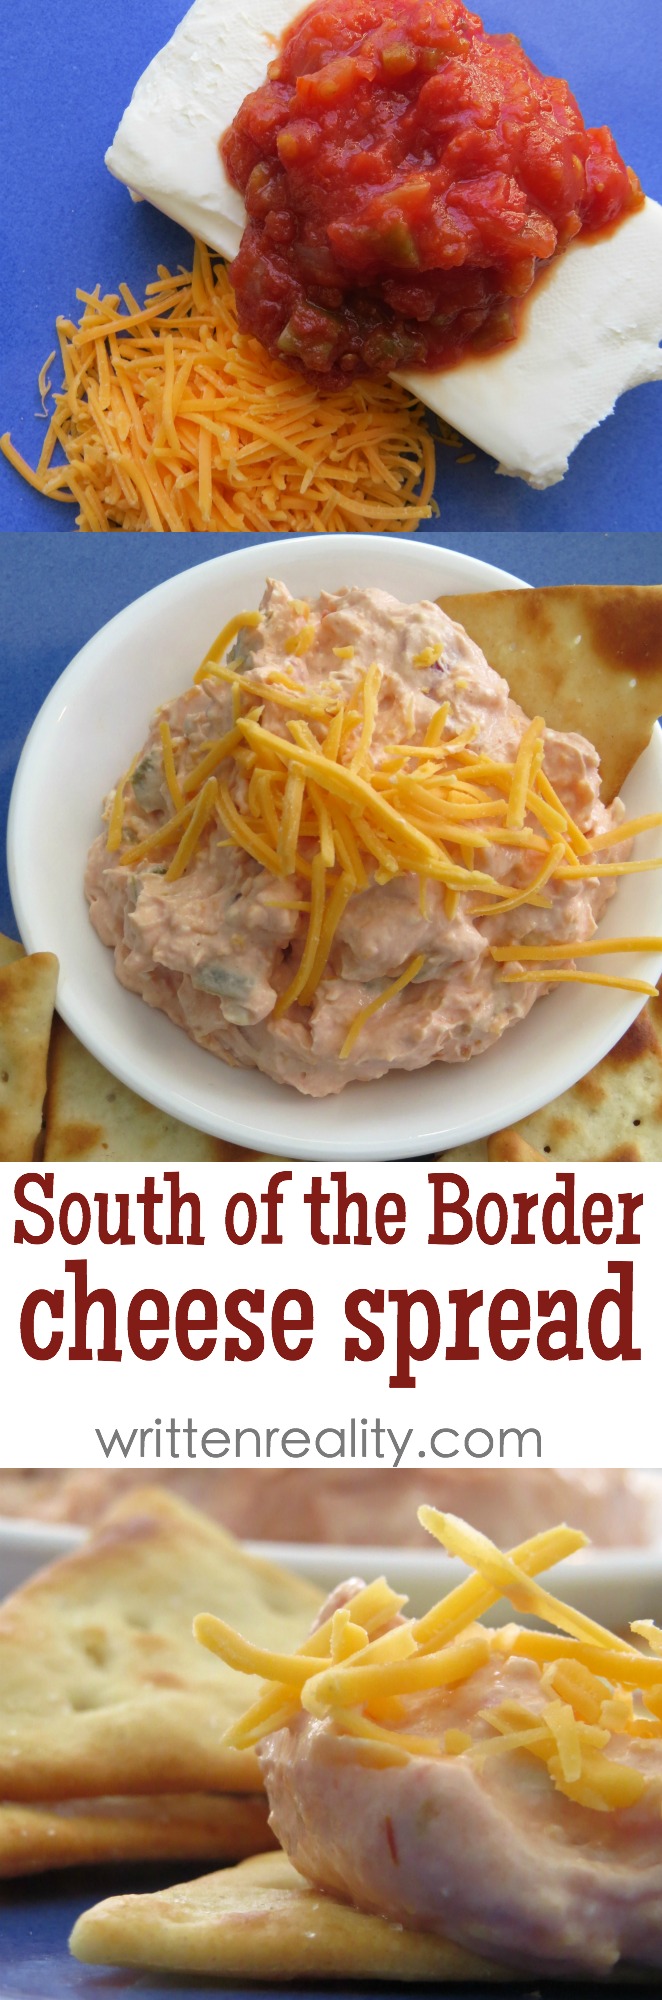 South of the Border Cheese Spread